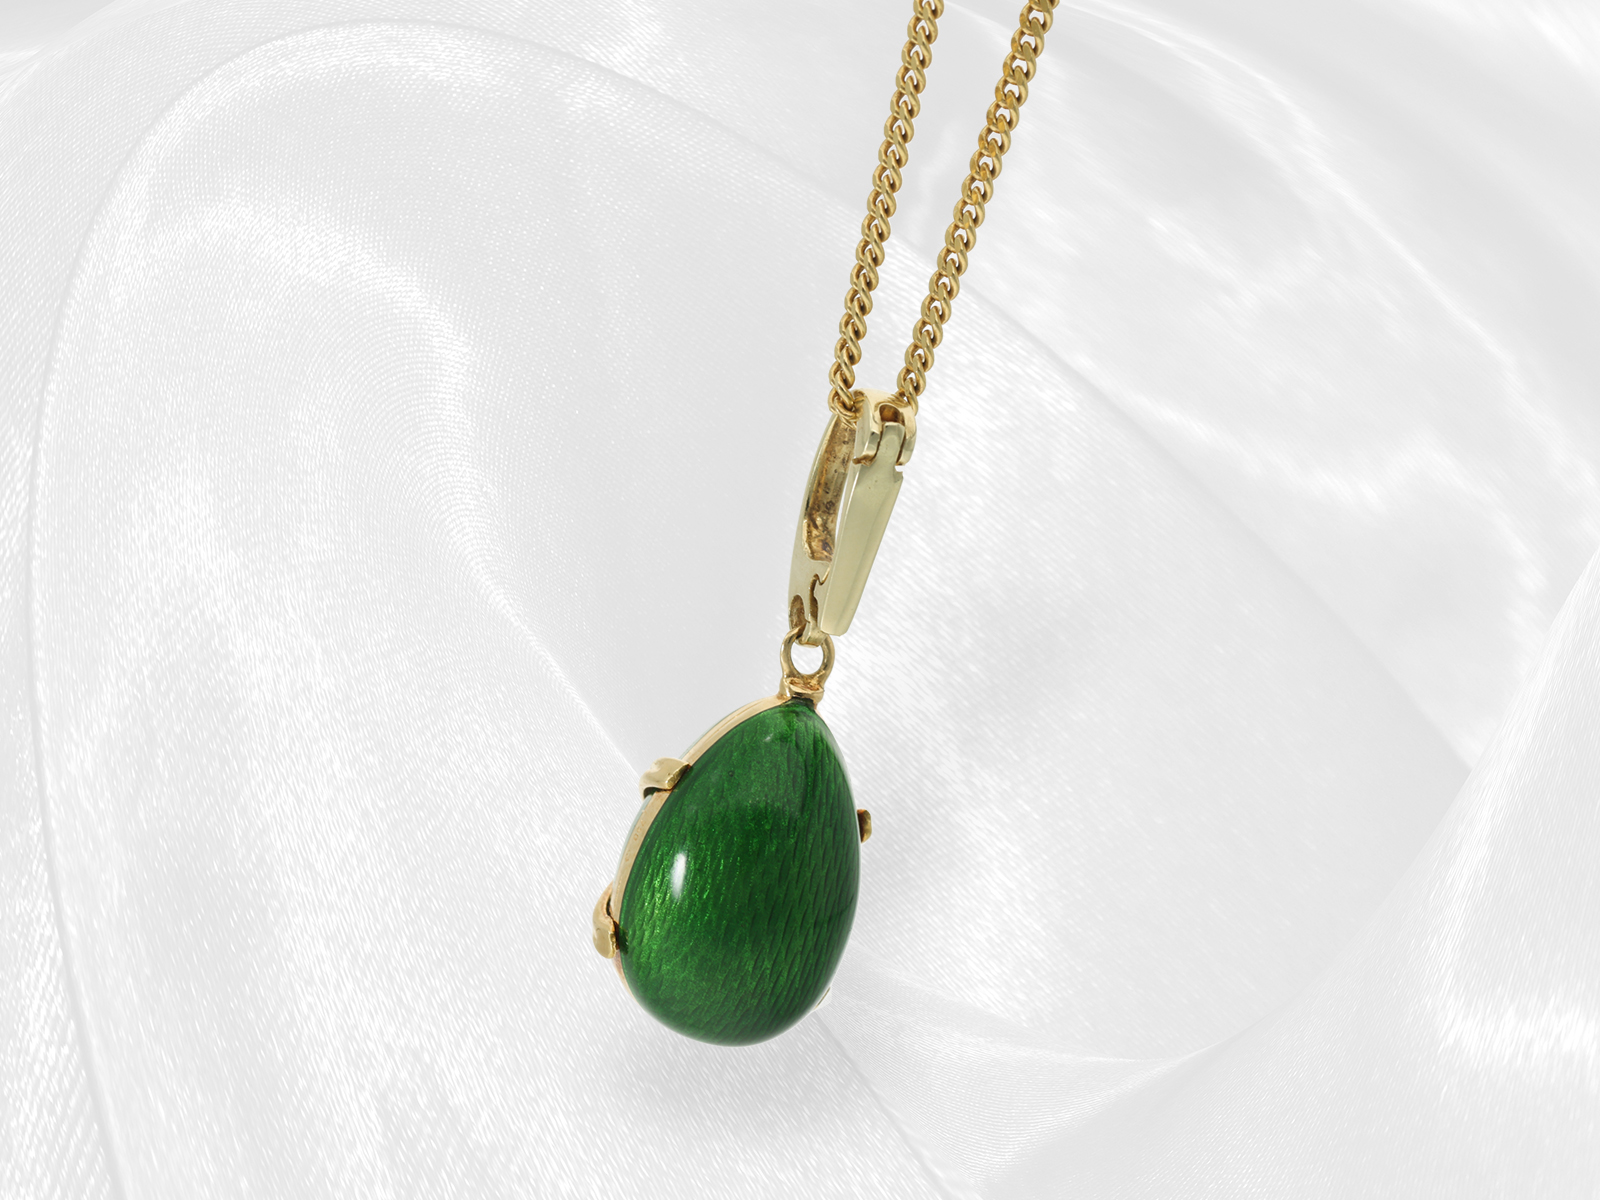 High-quality Fabergé enamel pendant with brilliant-cut diamonds, 18K gold, limited edition, with nec - Image 6 of 12